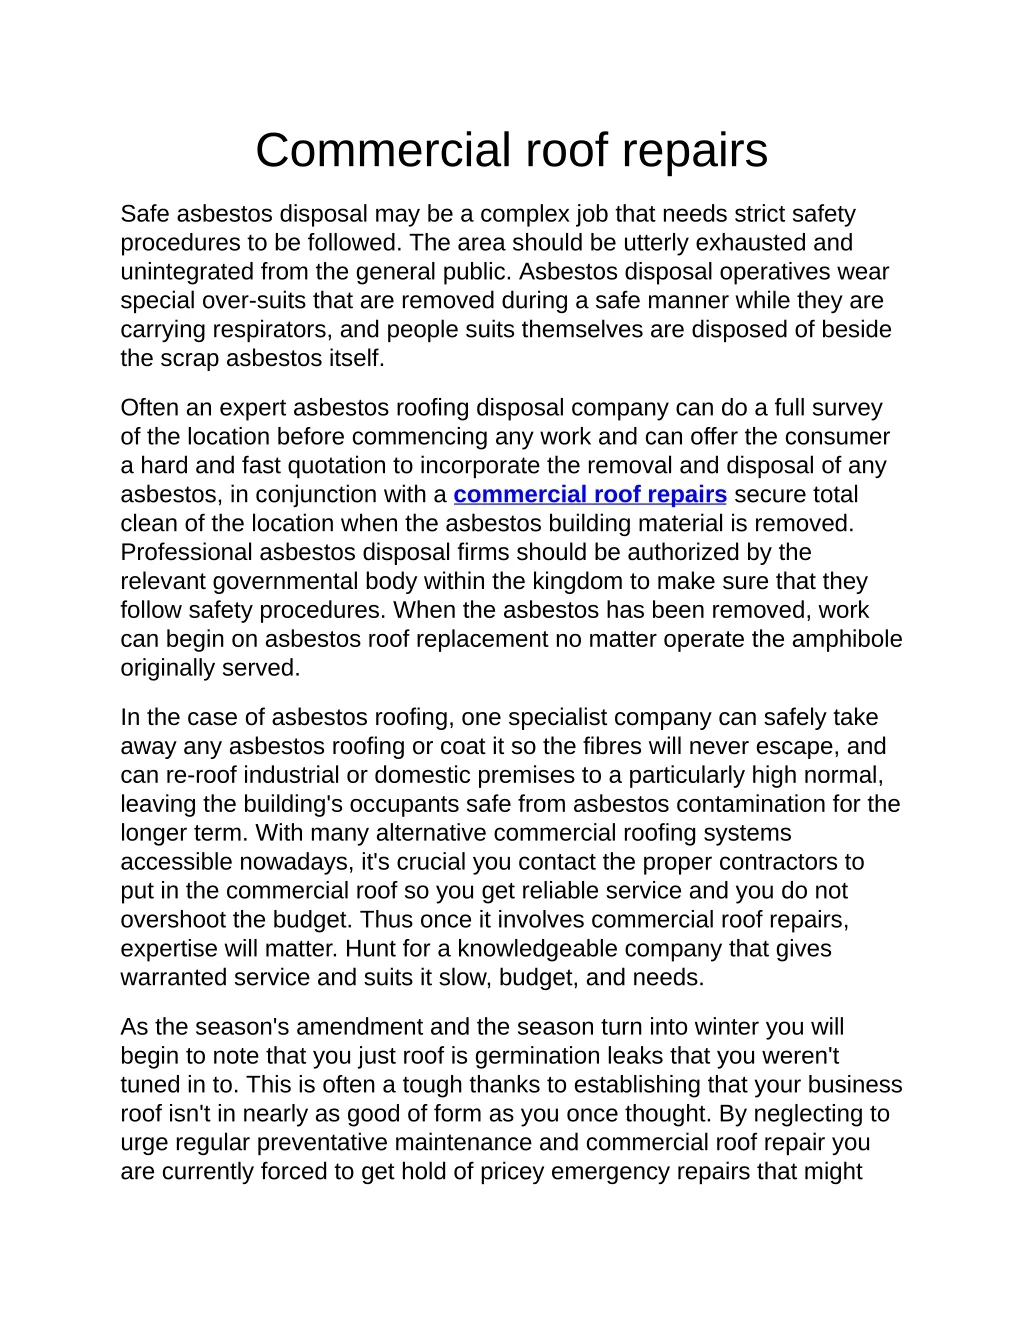 commercialroofrepairs